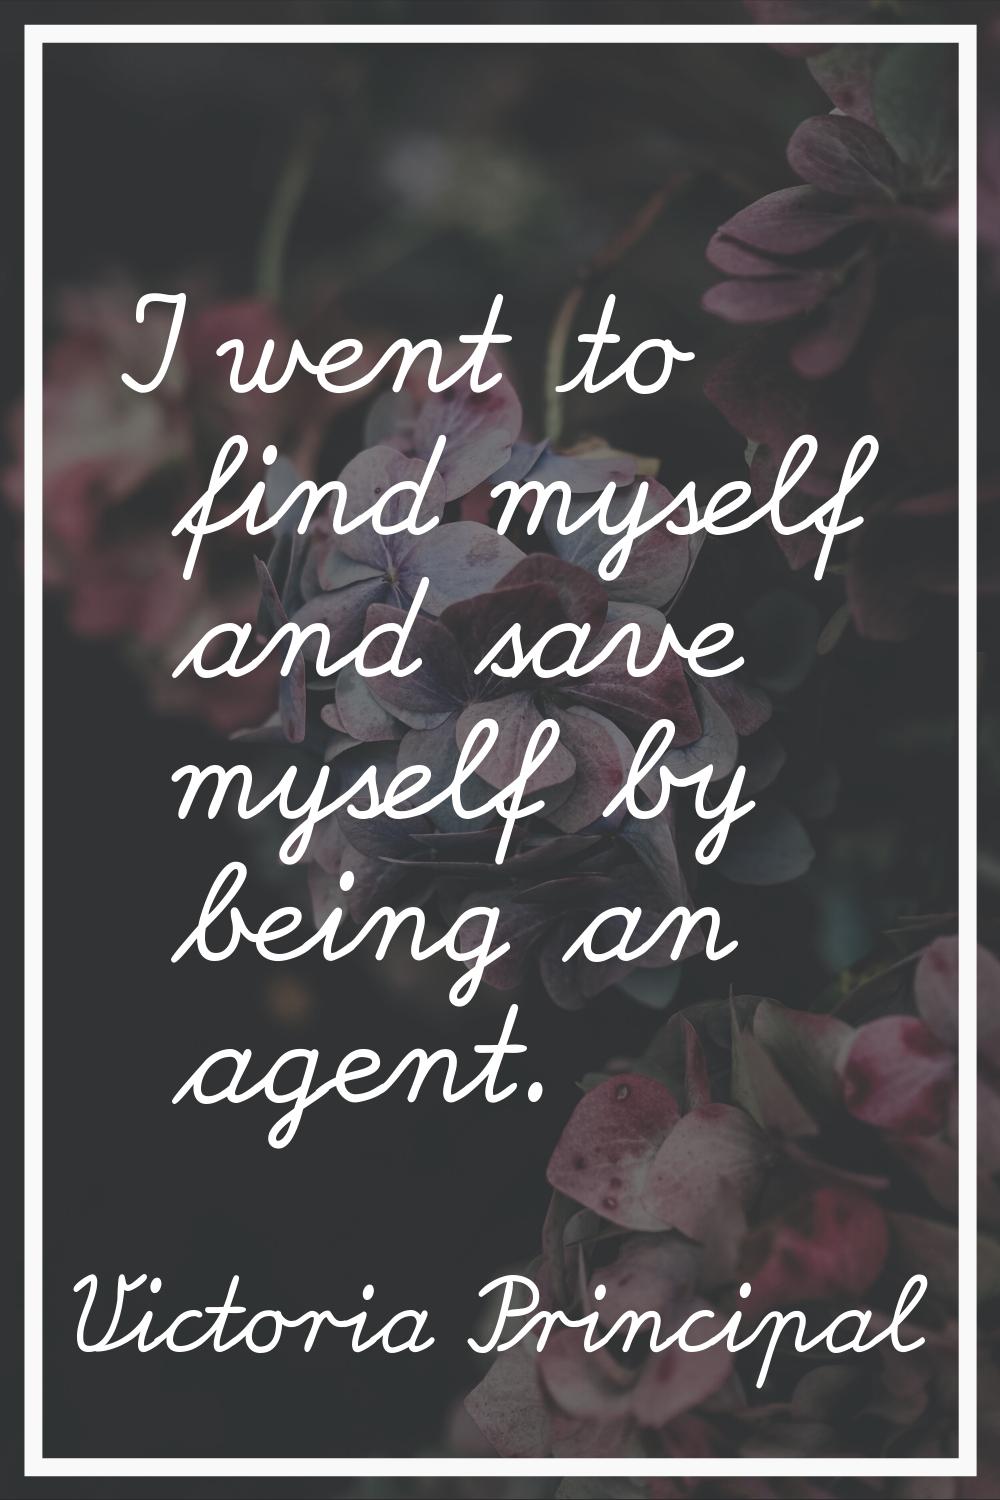 I went to find myself and save myself by being an agent.